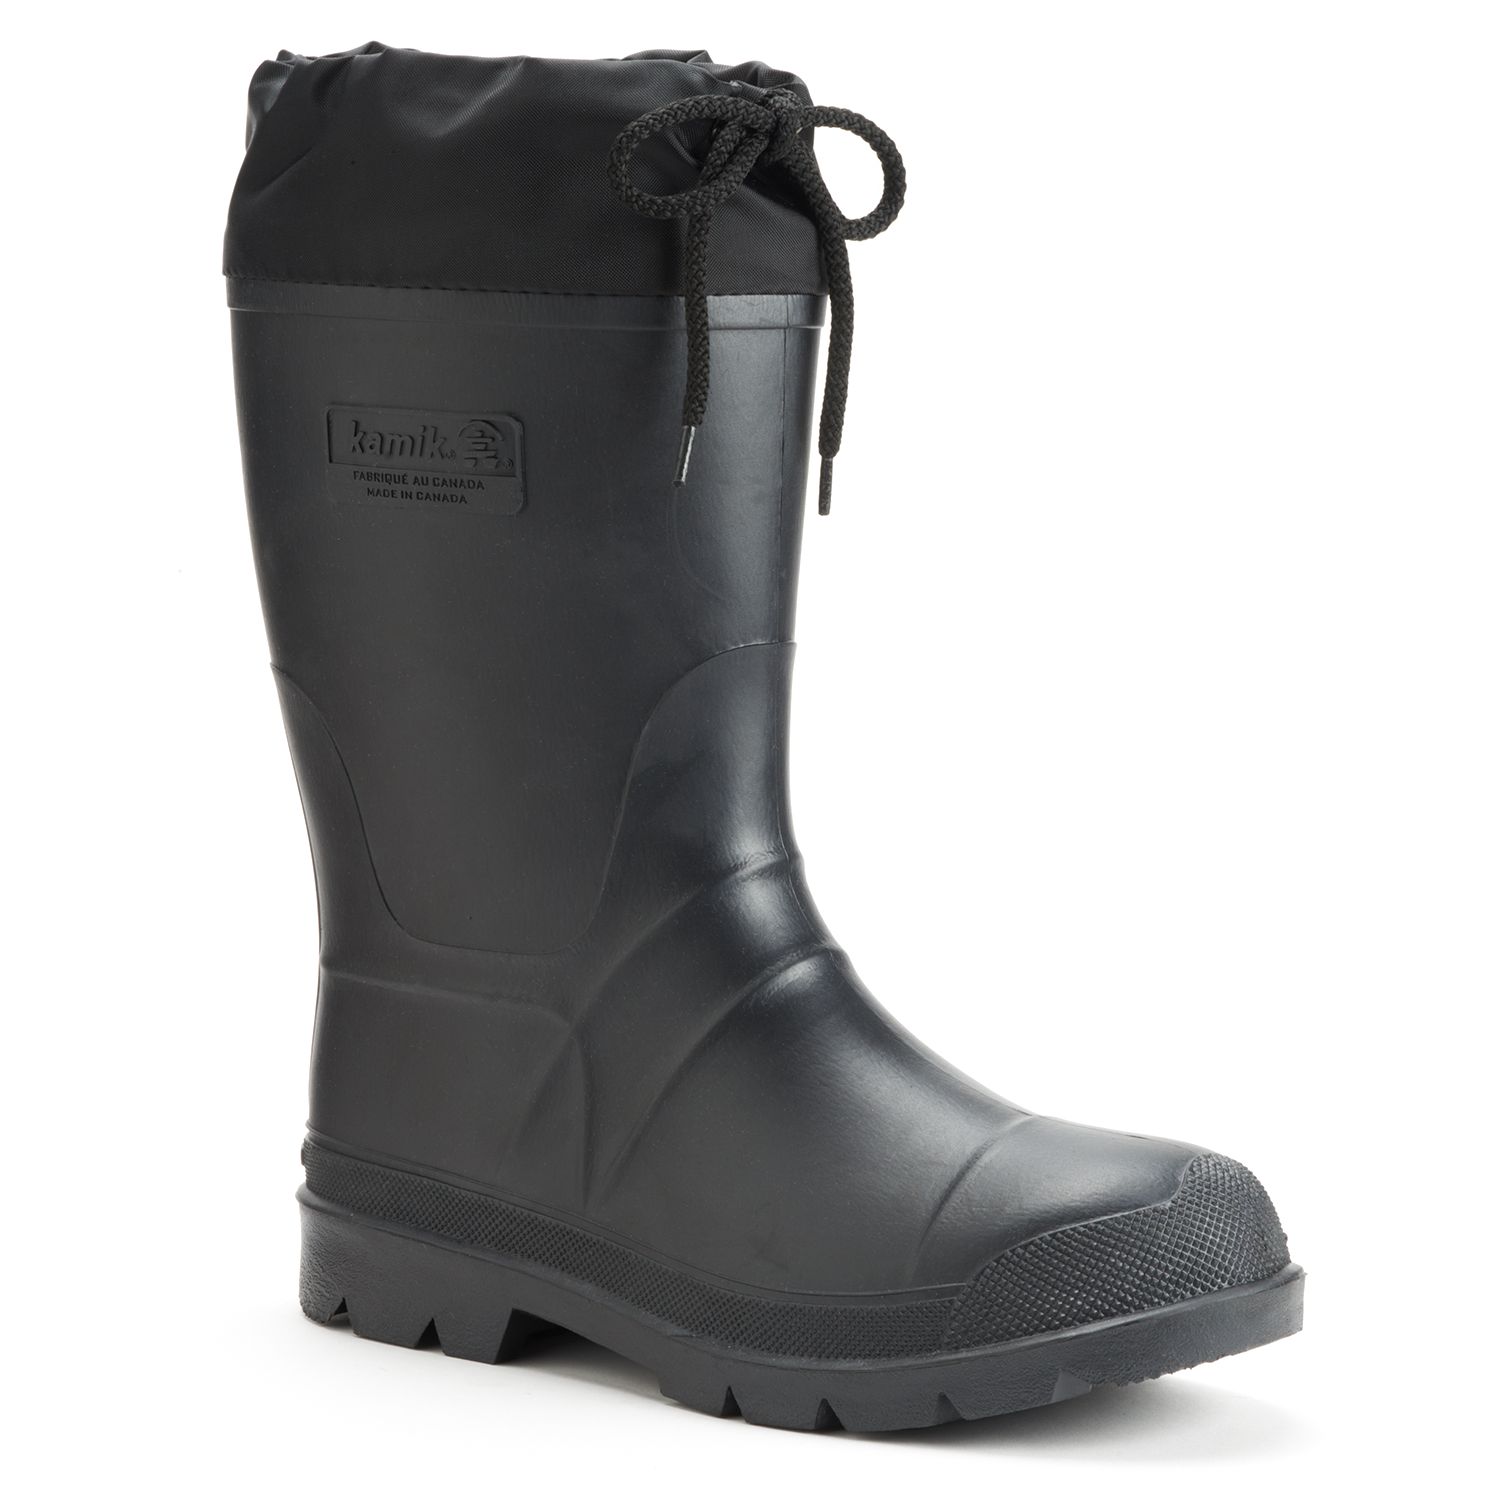 waterproof cold weather boots